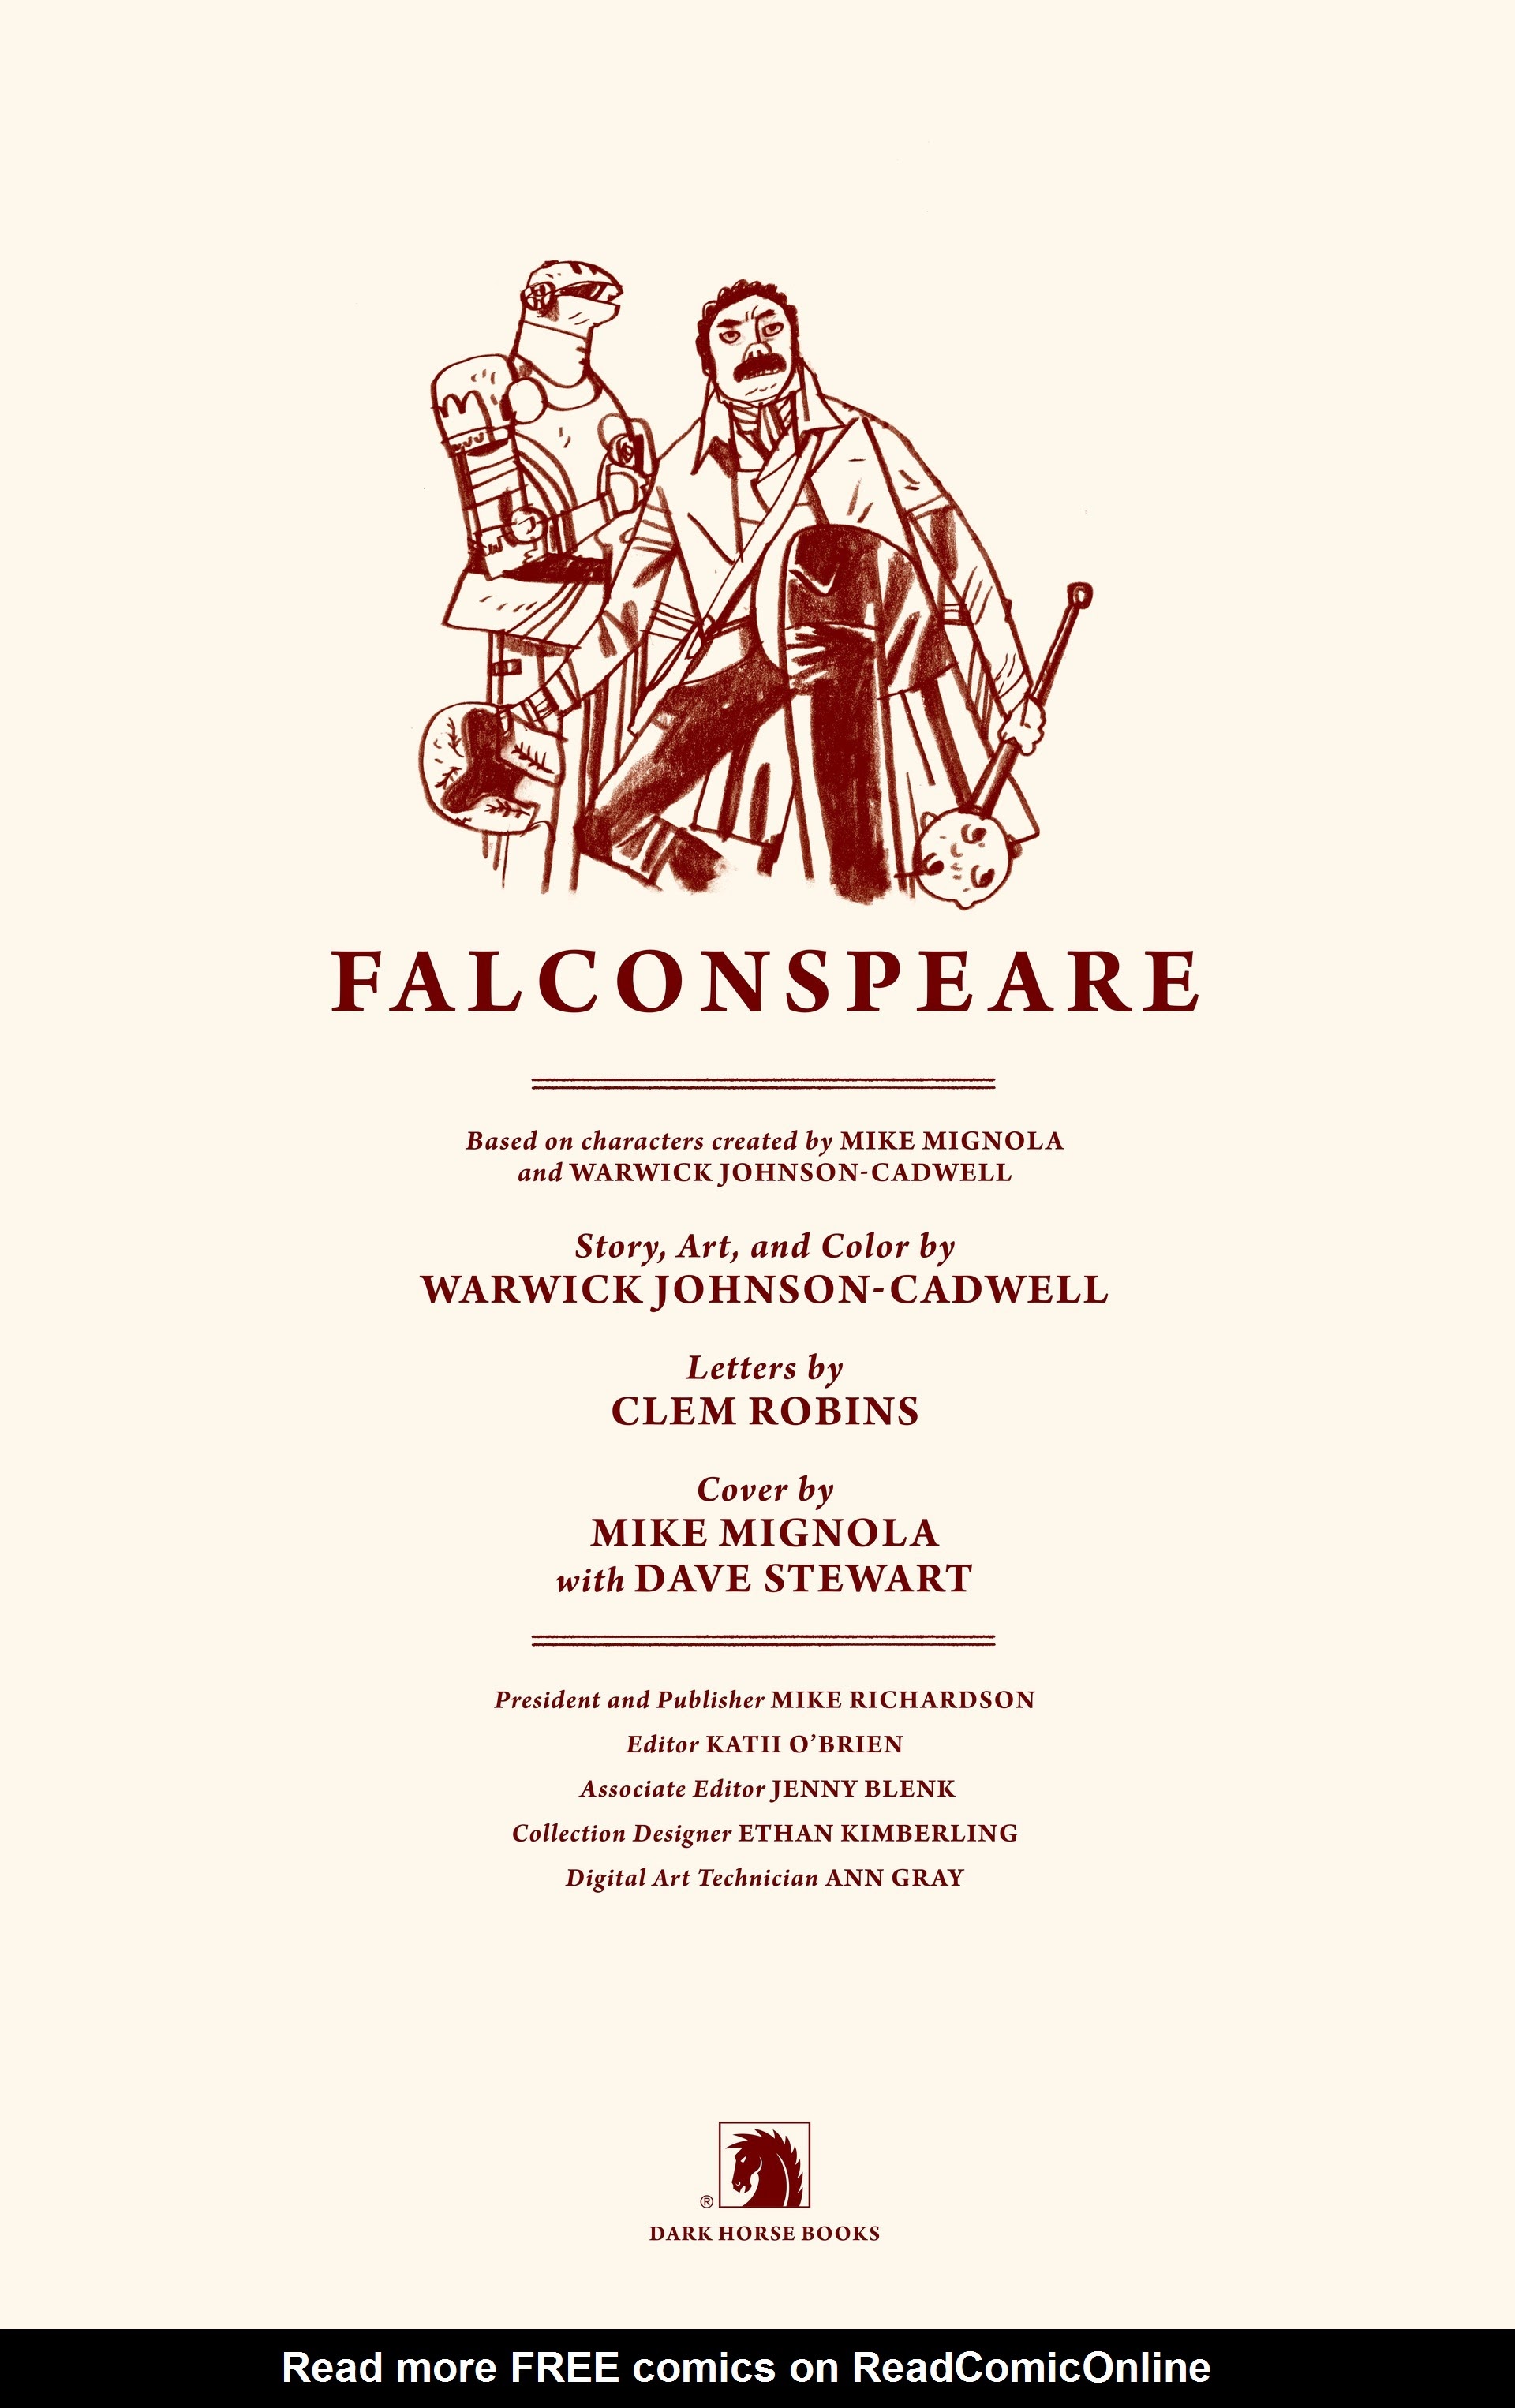 Read online Falconspeare comic -  Issue # Full - 6